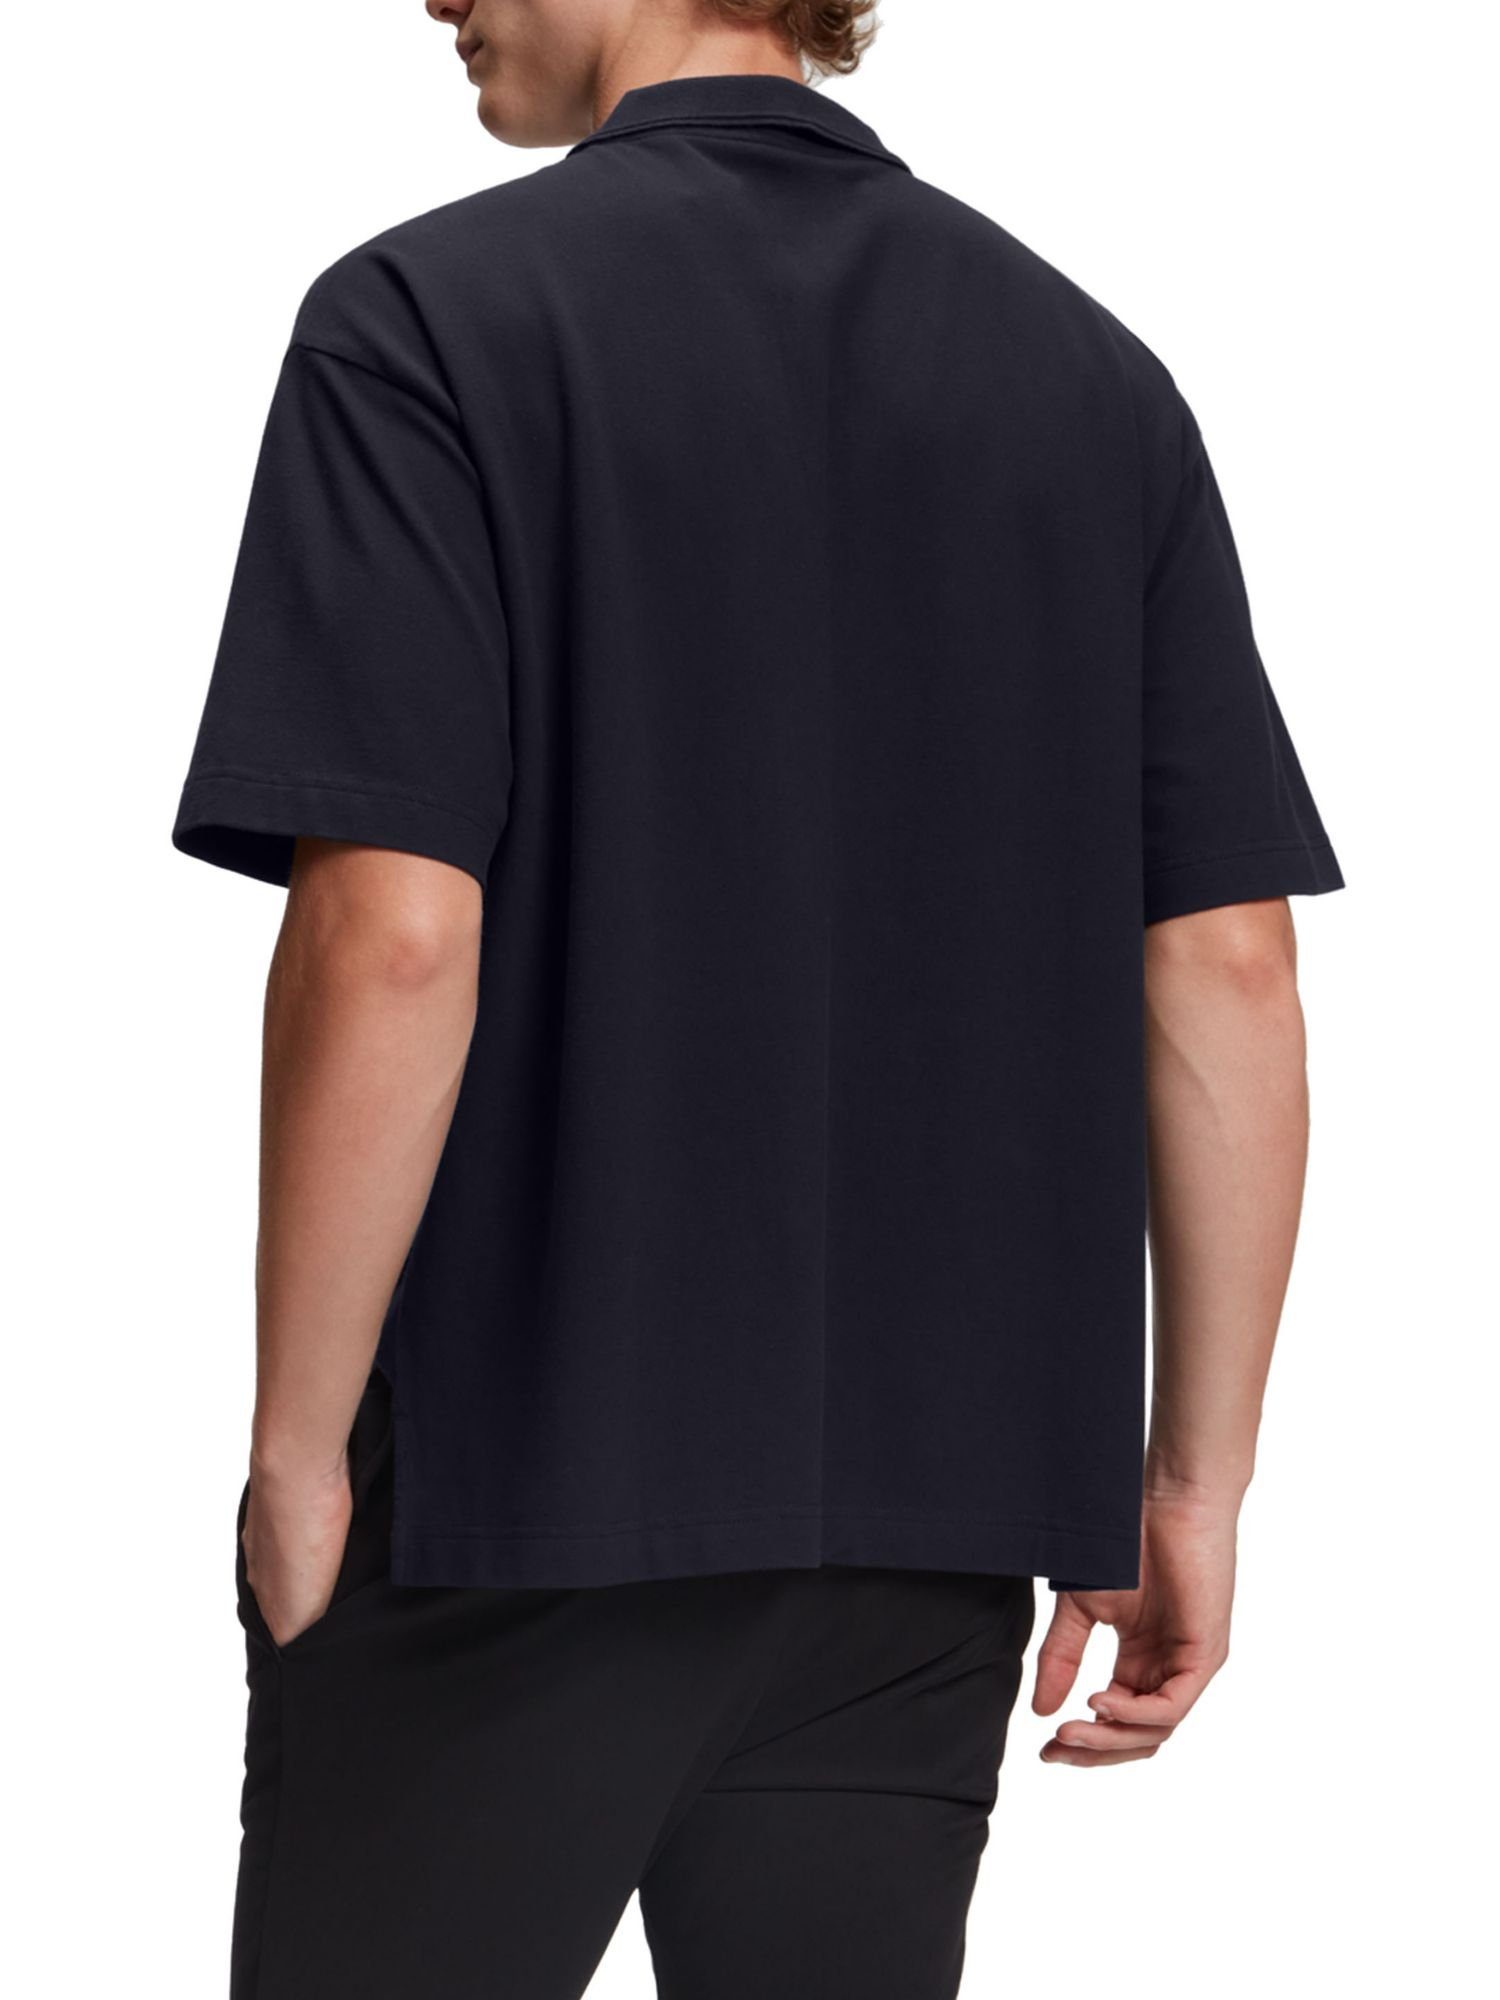 Esprit Dolphin-Badge Relaxed BLACK Poloshirt Fit mit Poloshirt